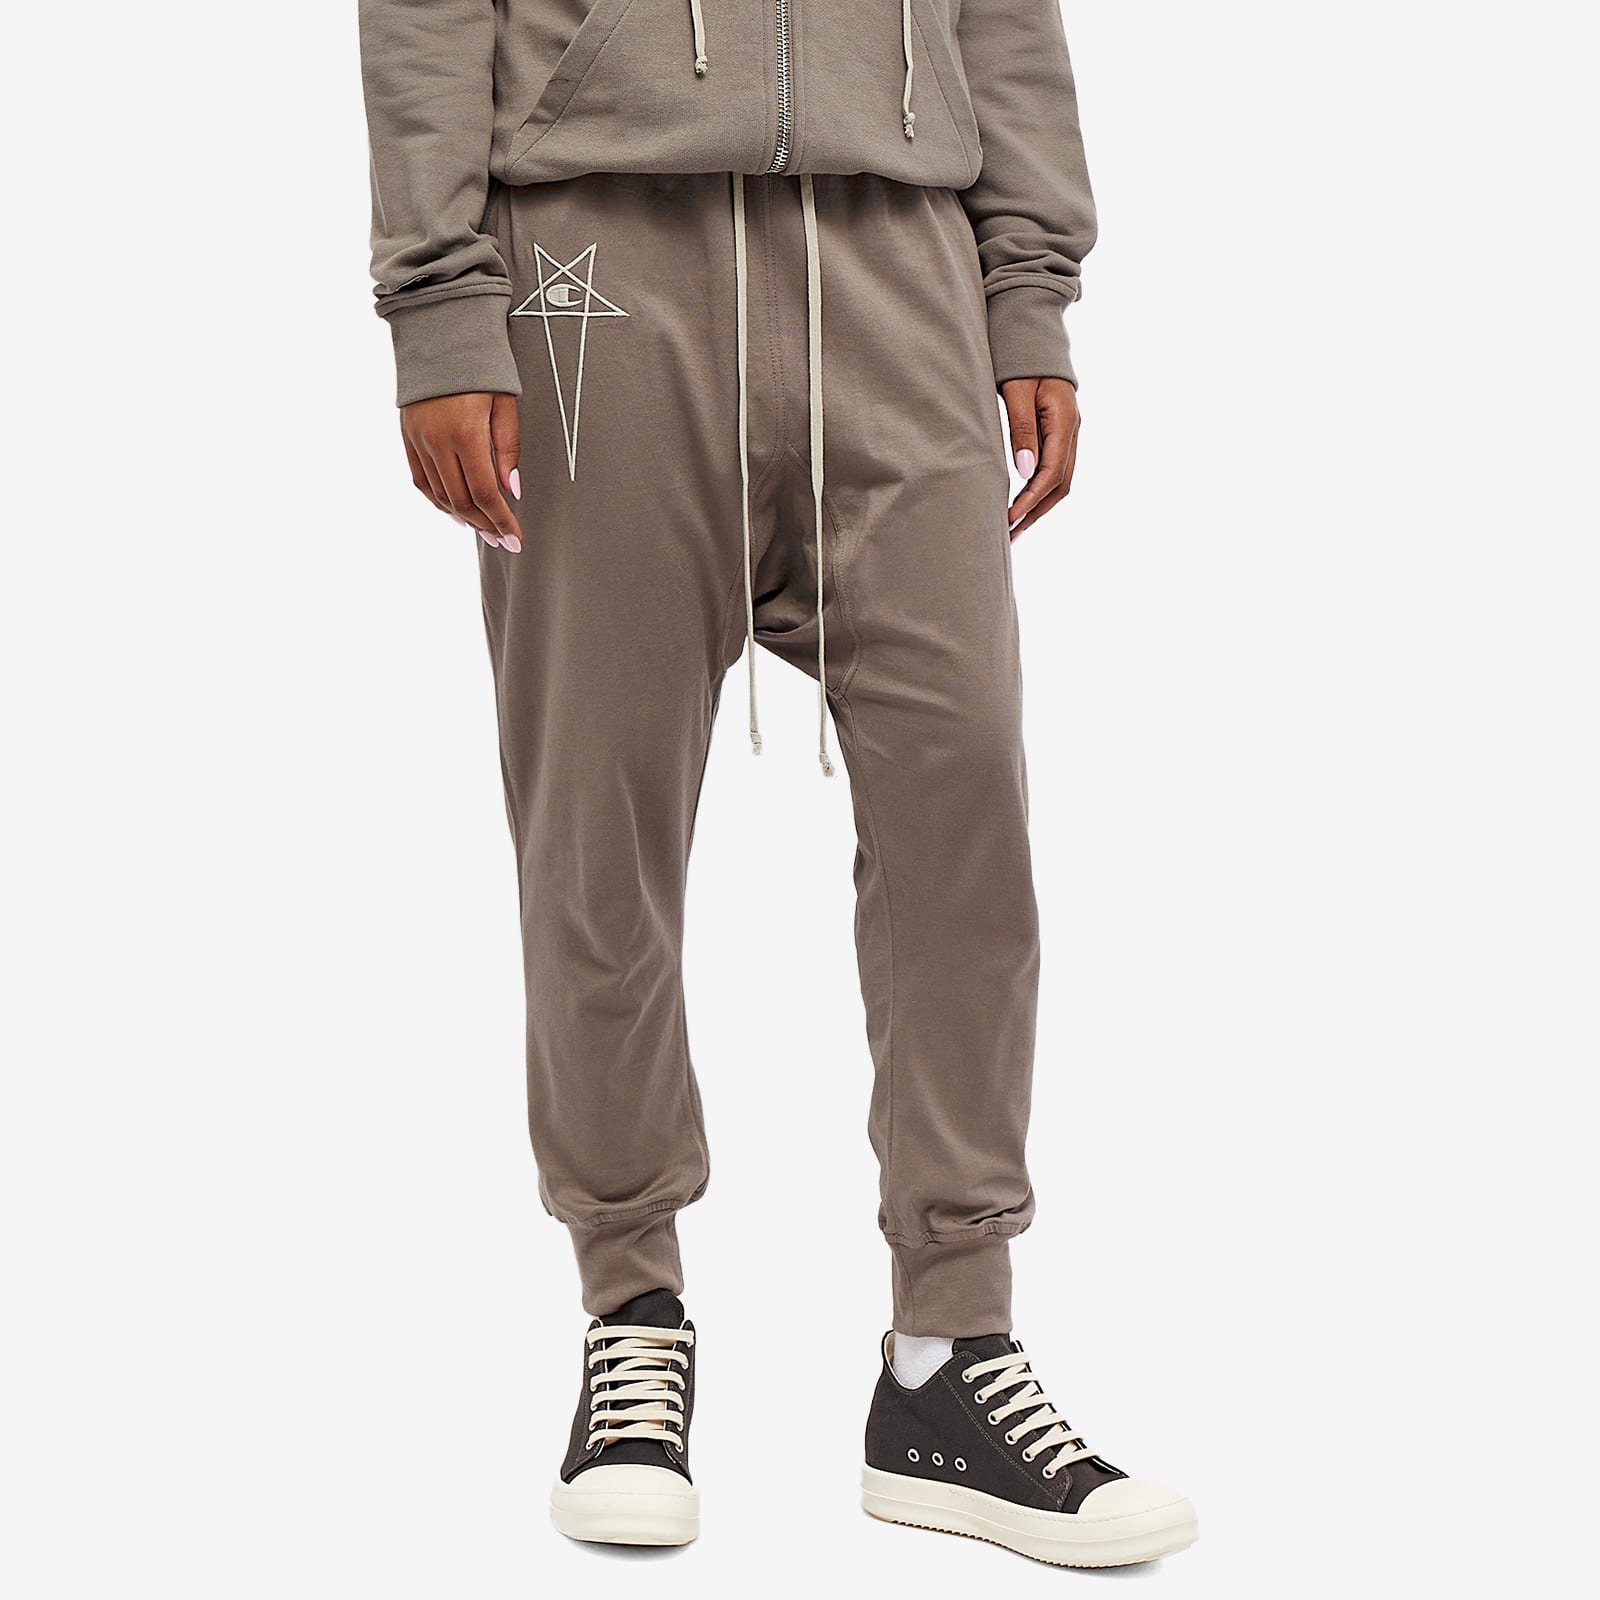 Champion Clothing for Men - Shop Now on FARFETCH